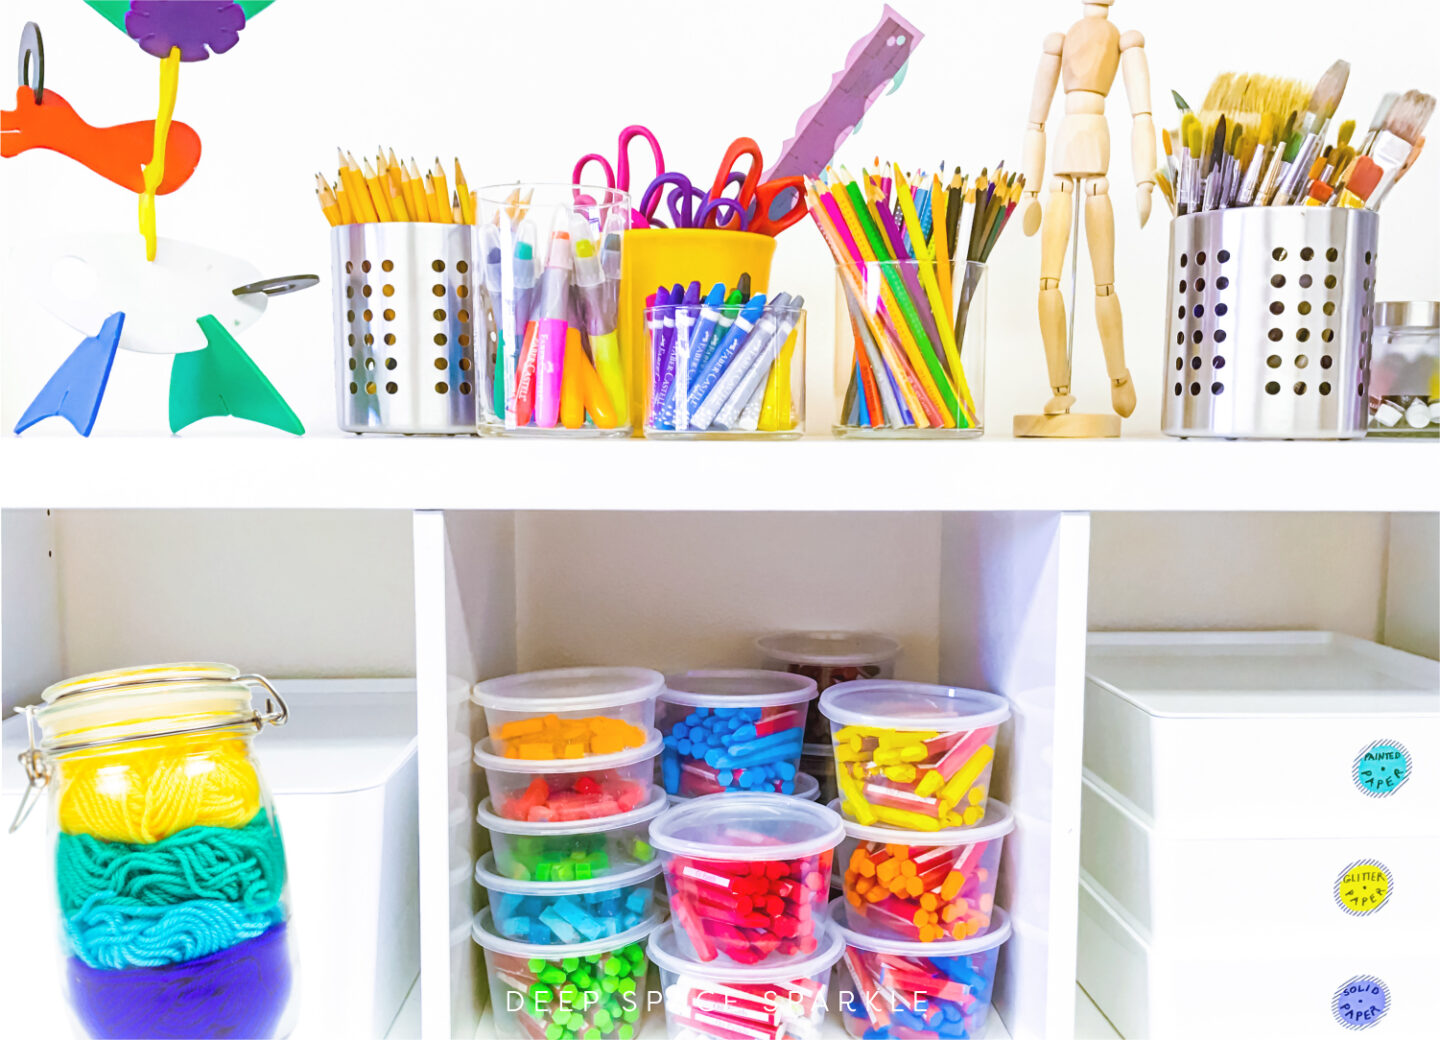 Supplies 4 Things to Organize at the End of the Year